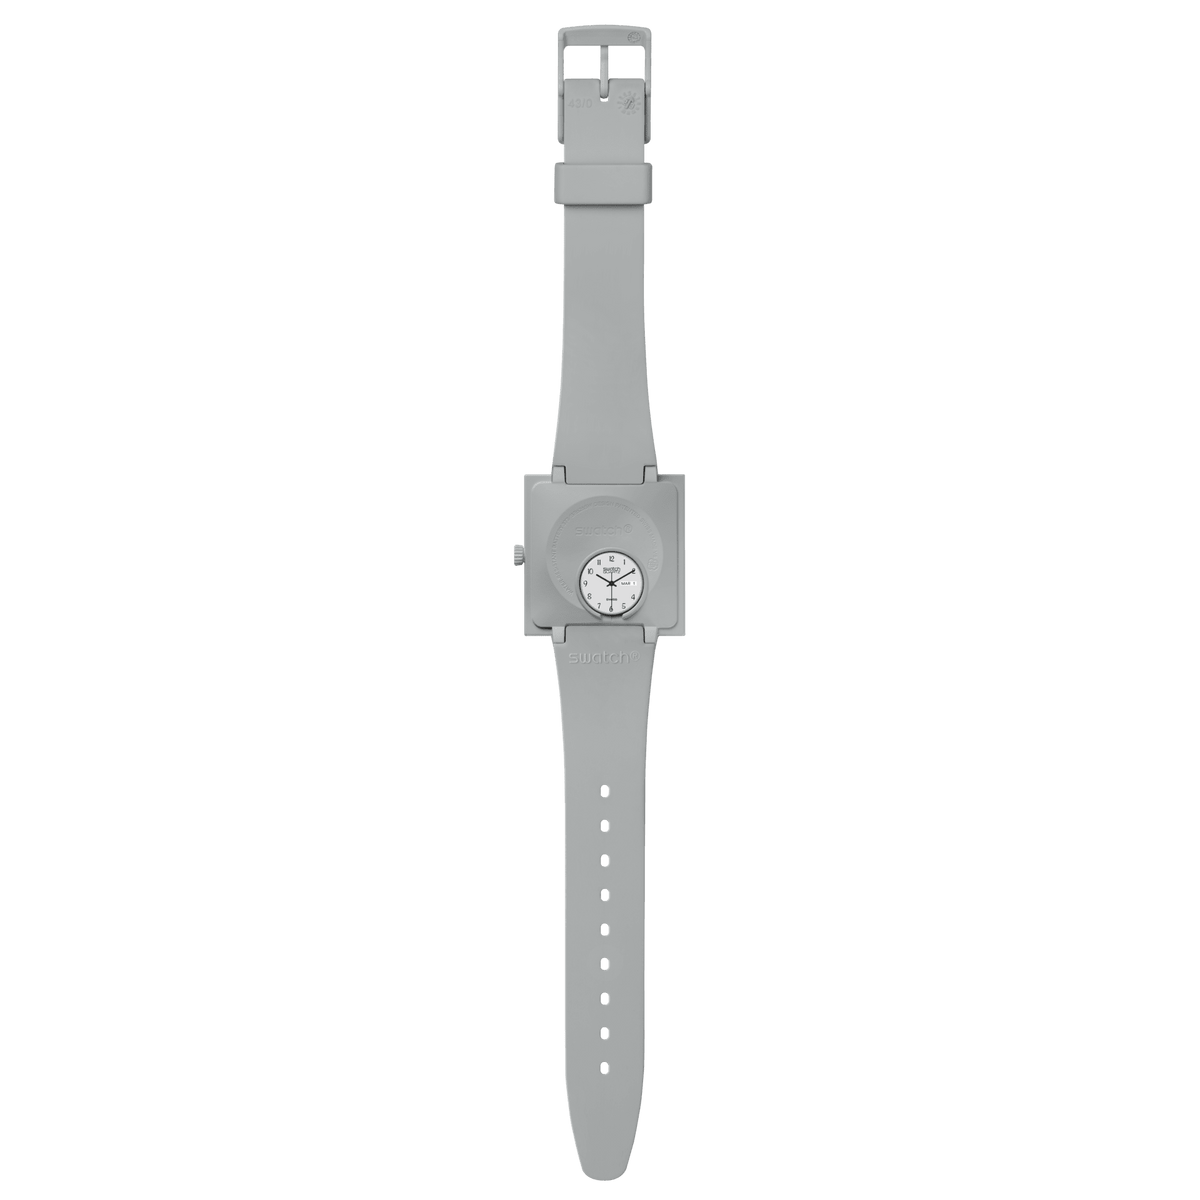 Swatch Watch - What if... Grey?